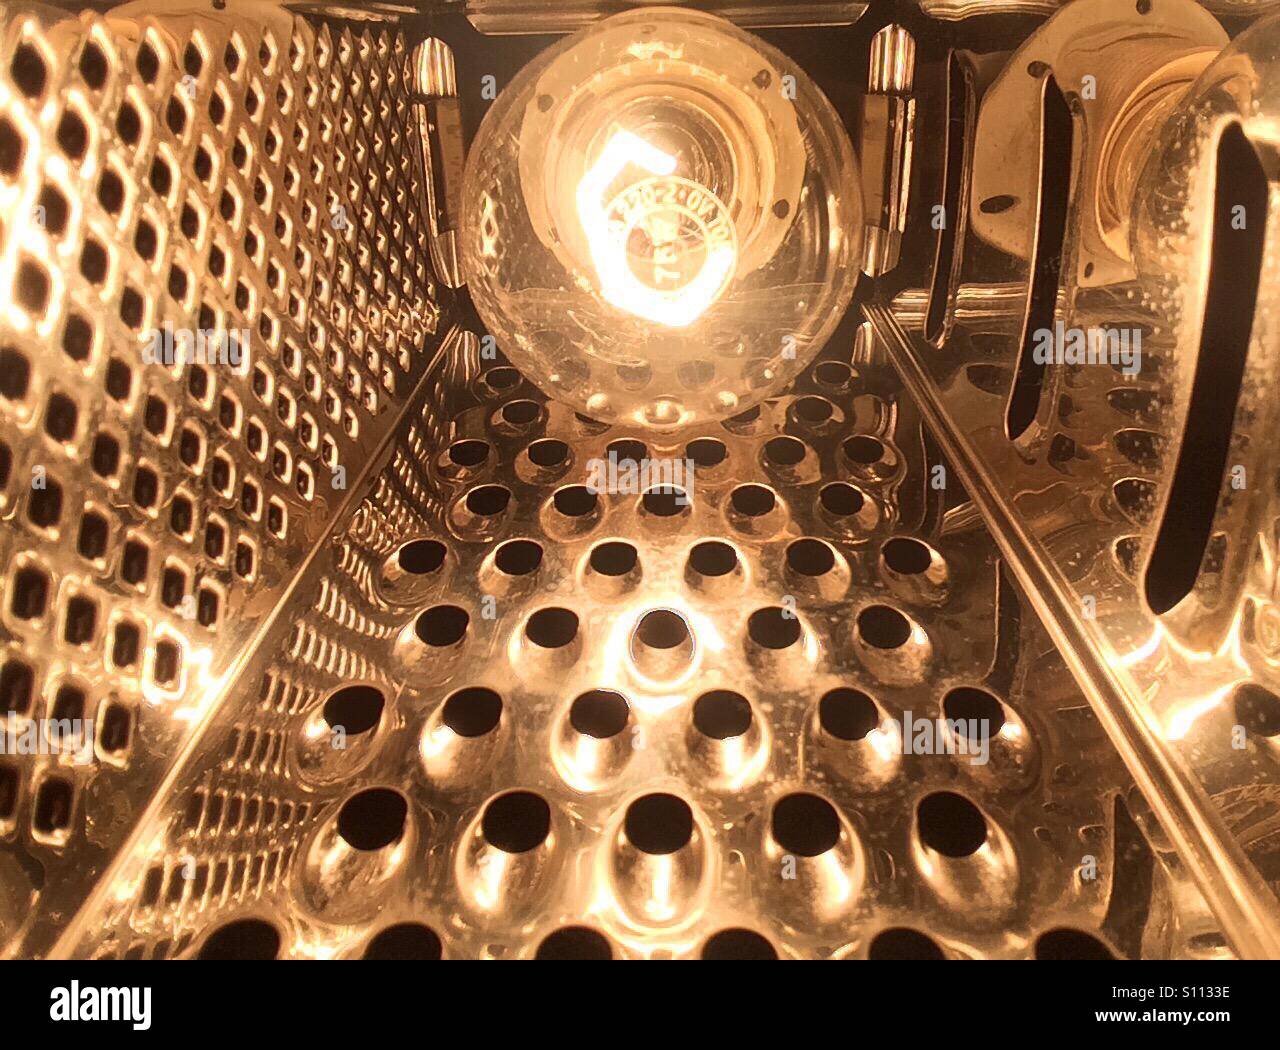 Inside view of cheese grater lamp Stock Photo - Alamy